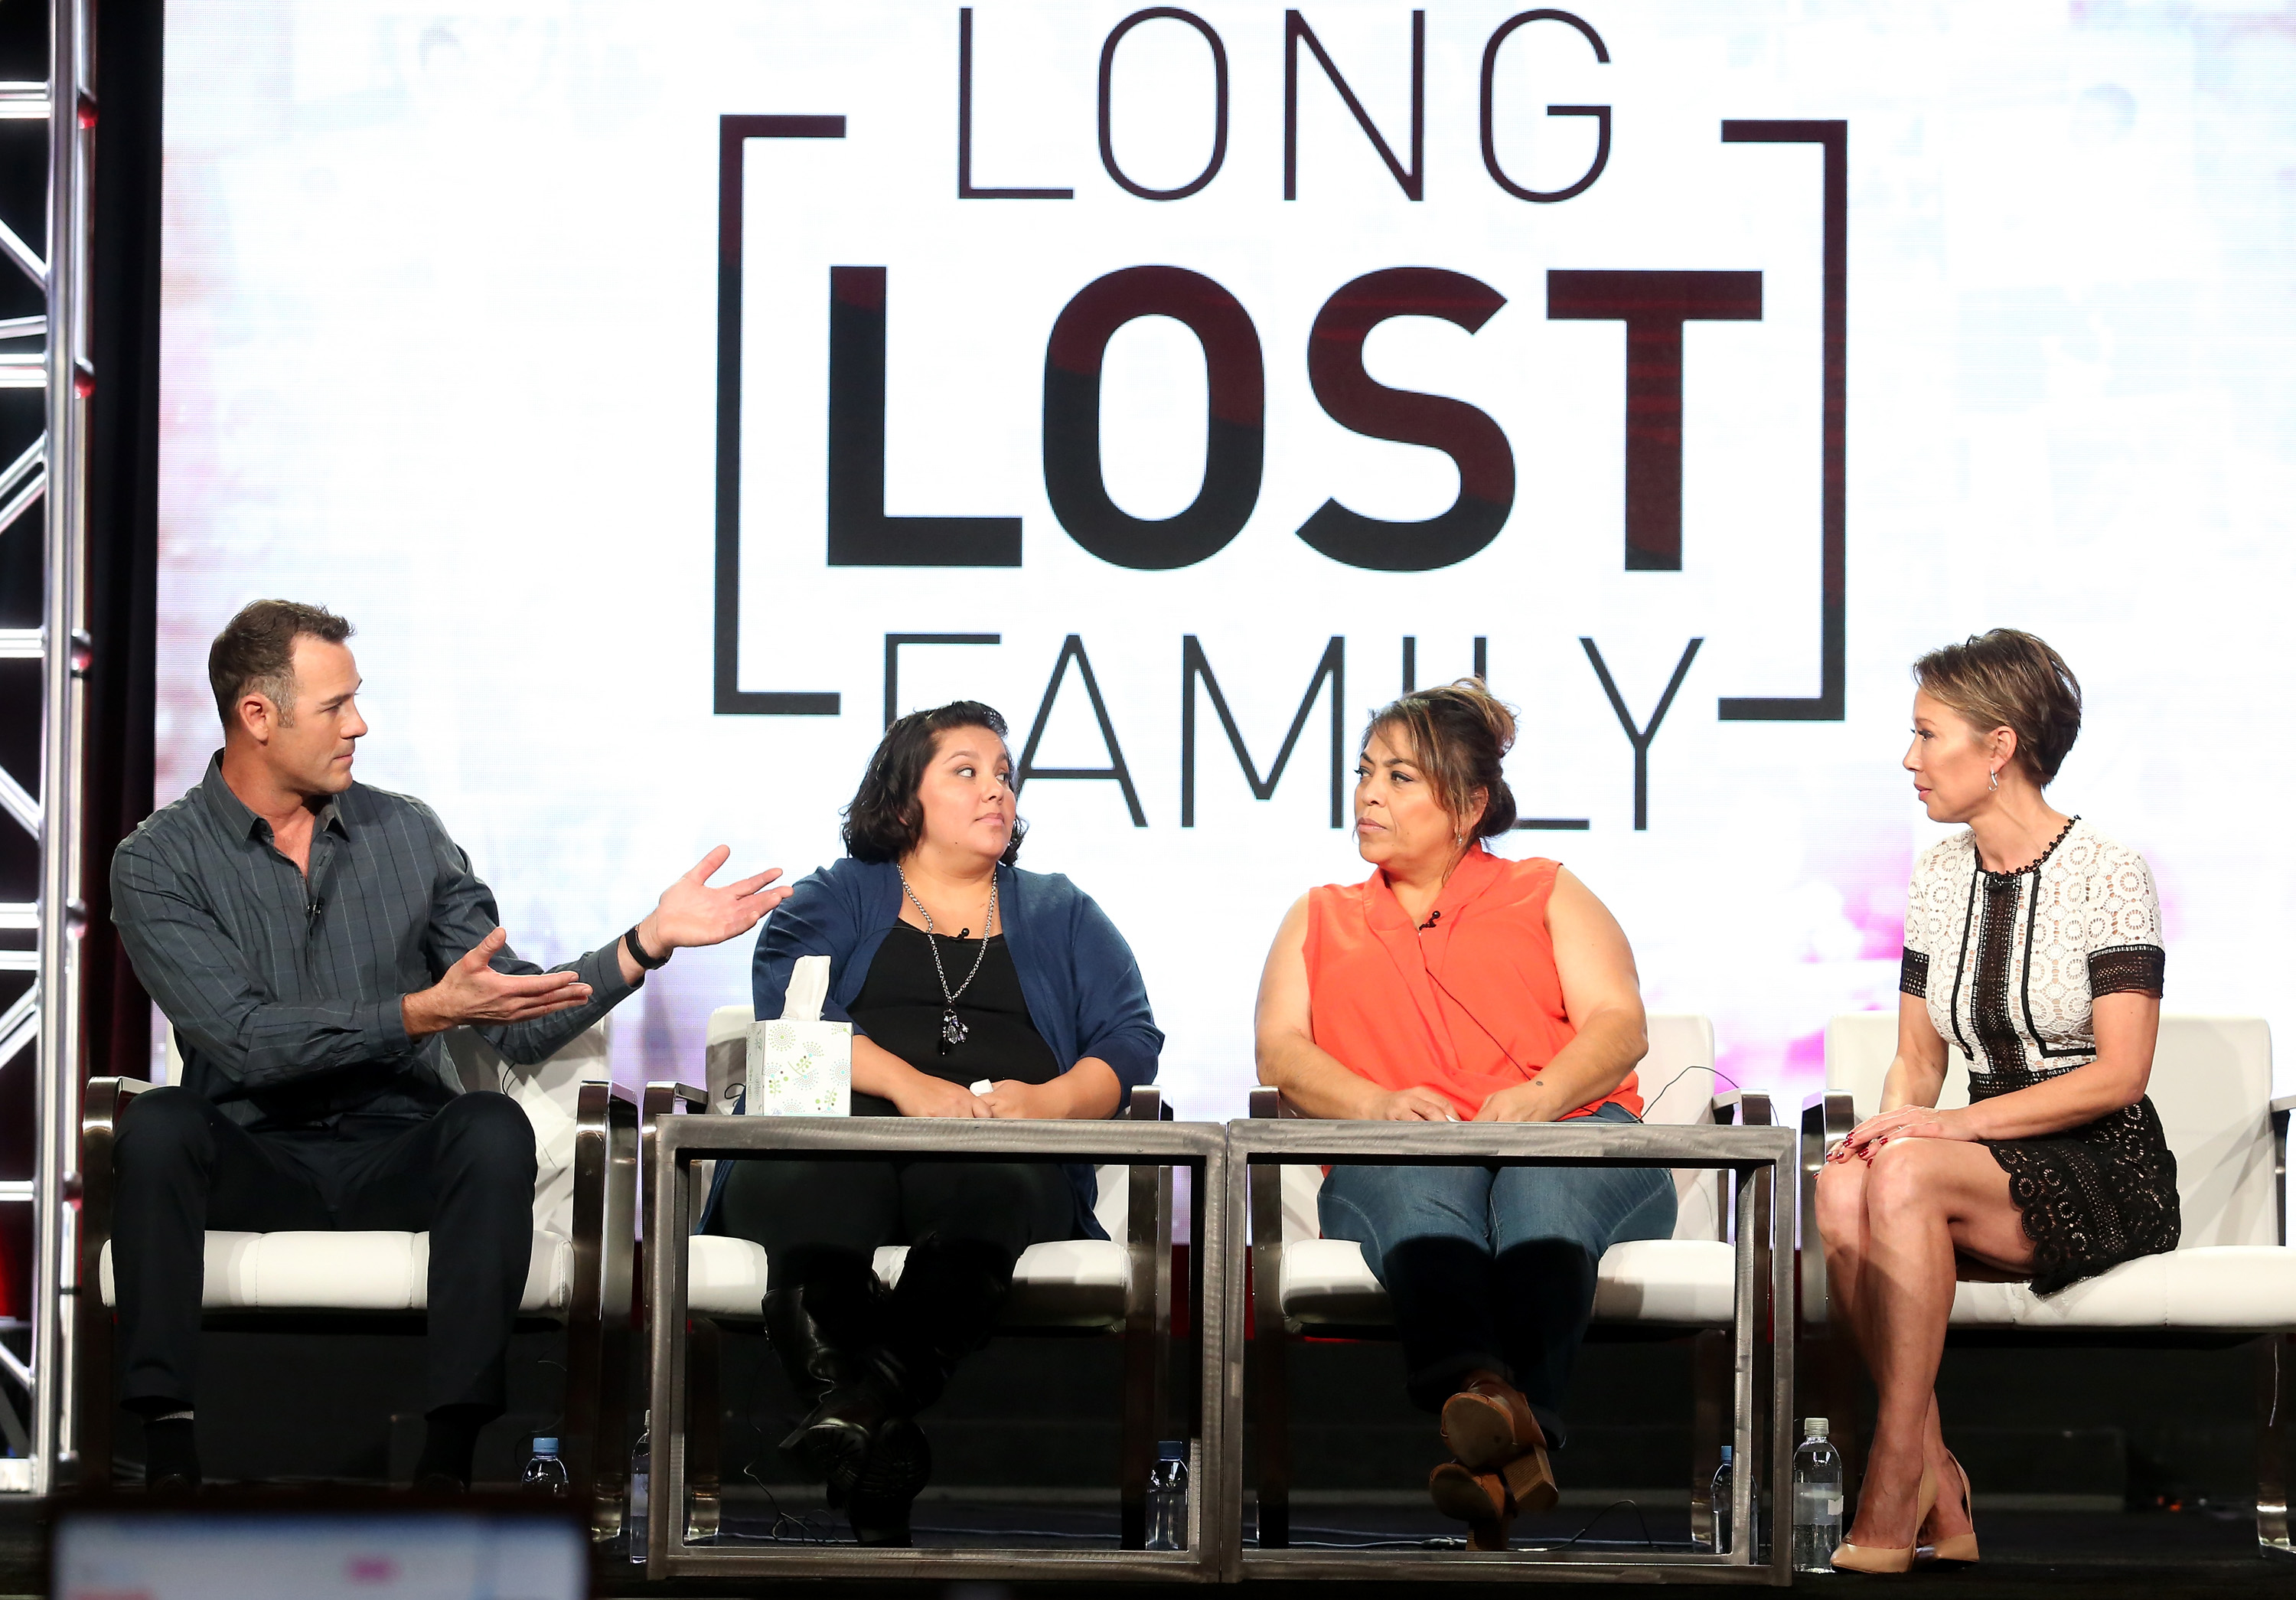 Is Long Lost Family Real? Find out More About the Reality Show!